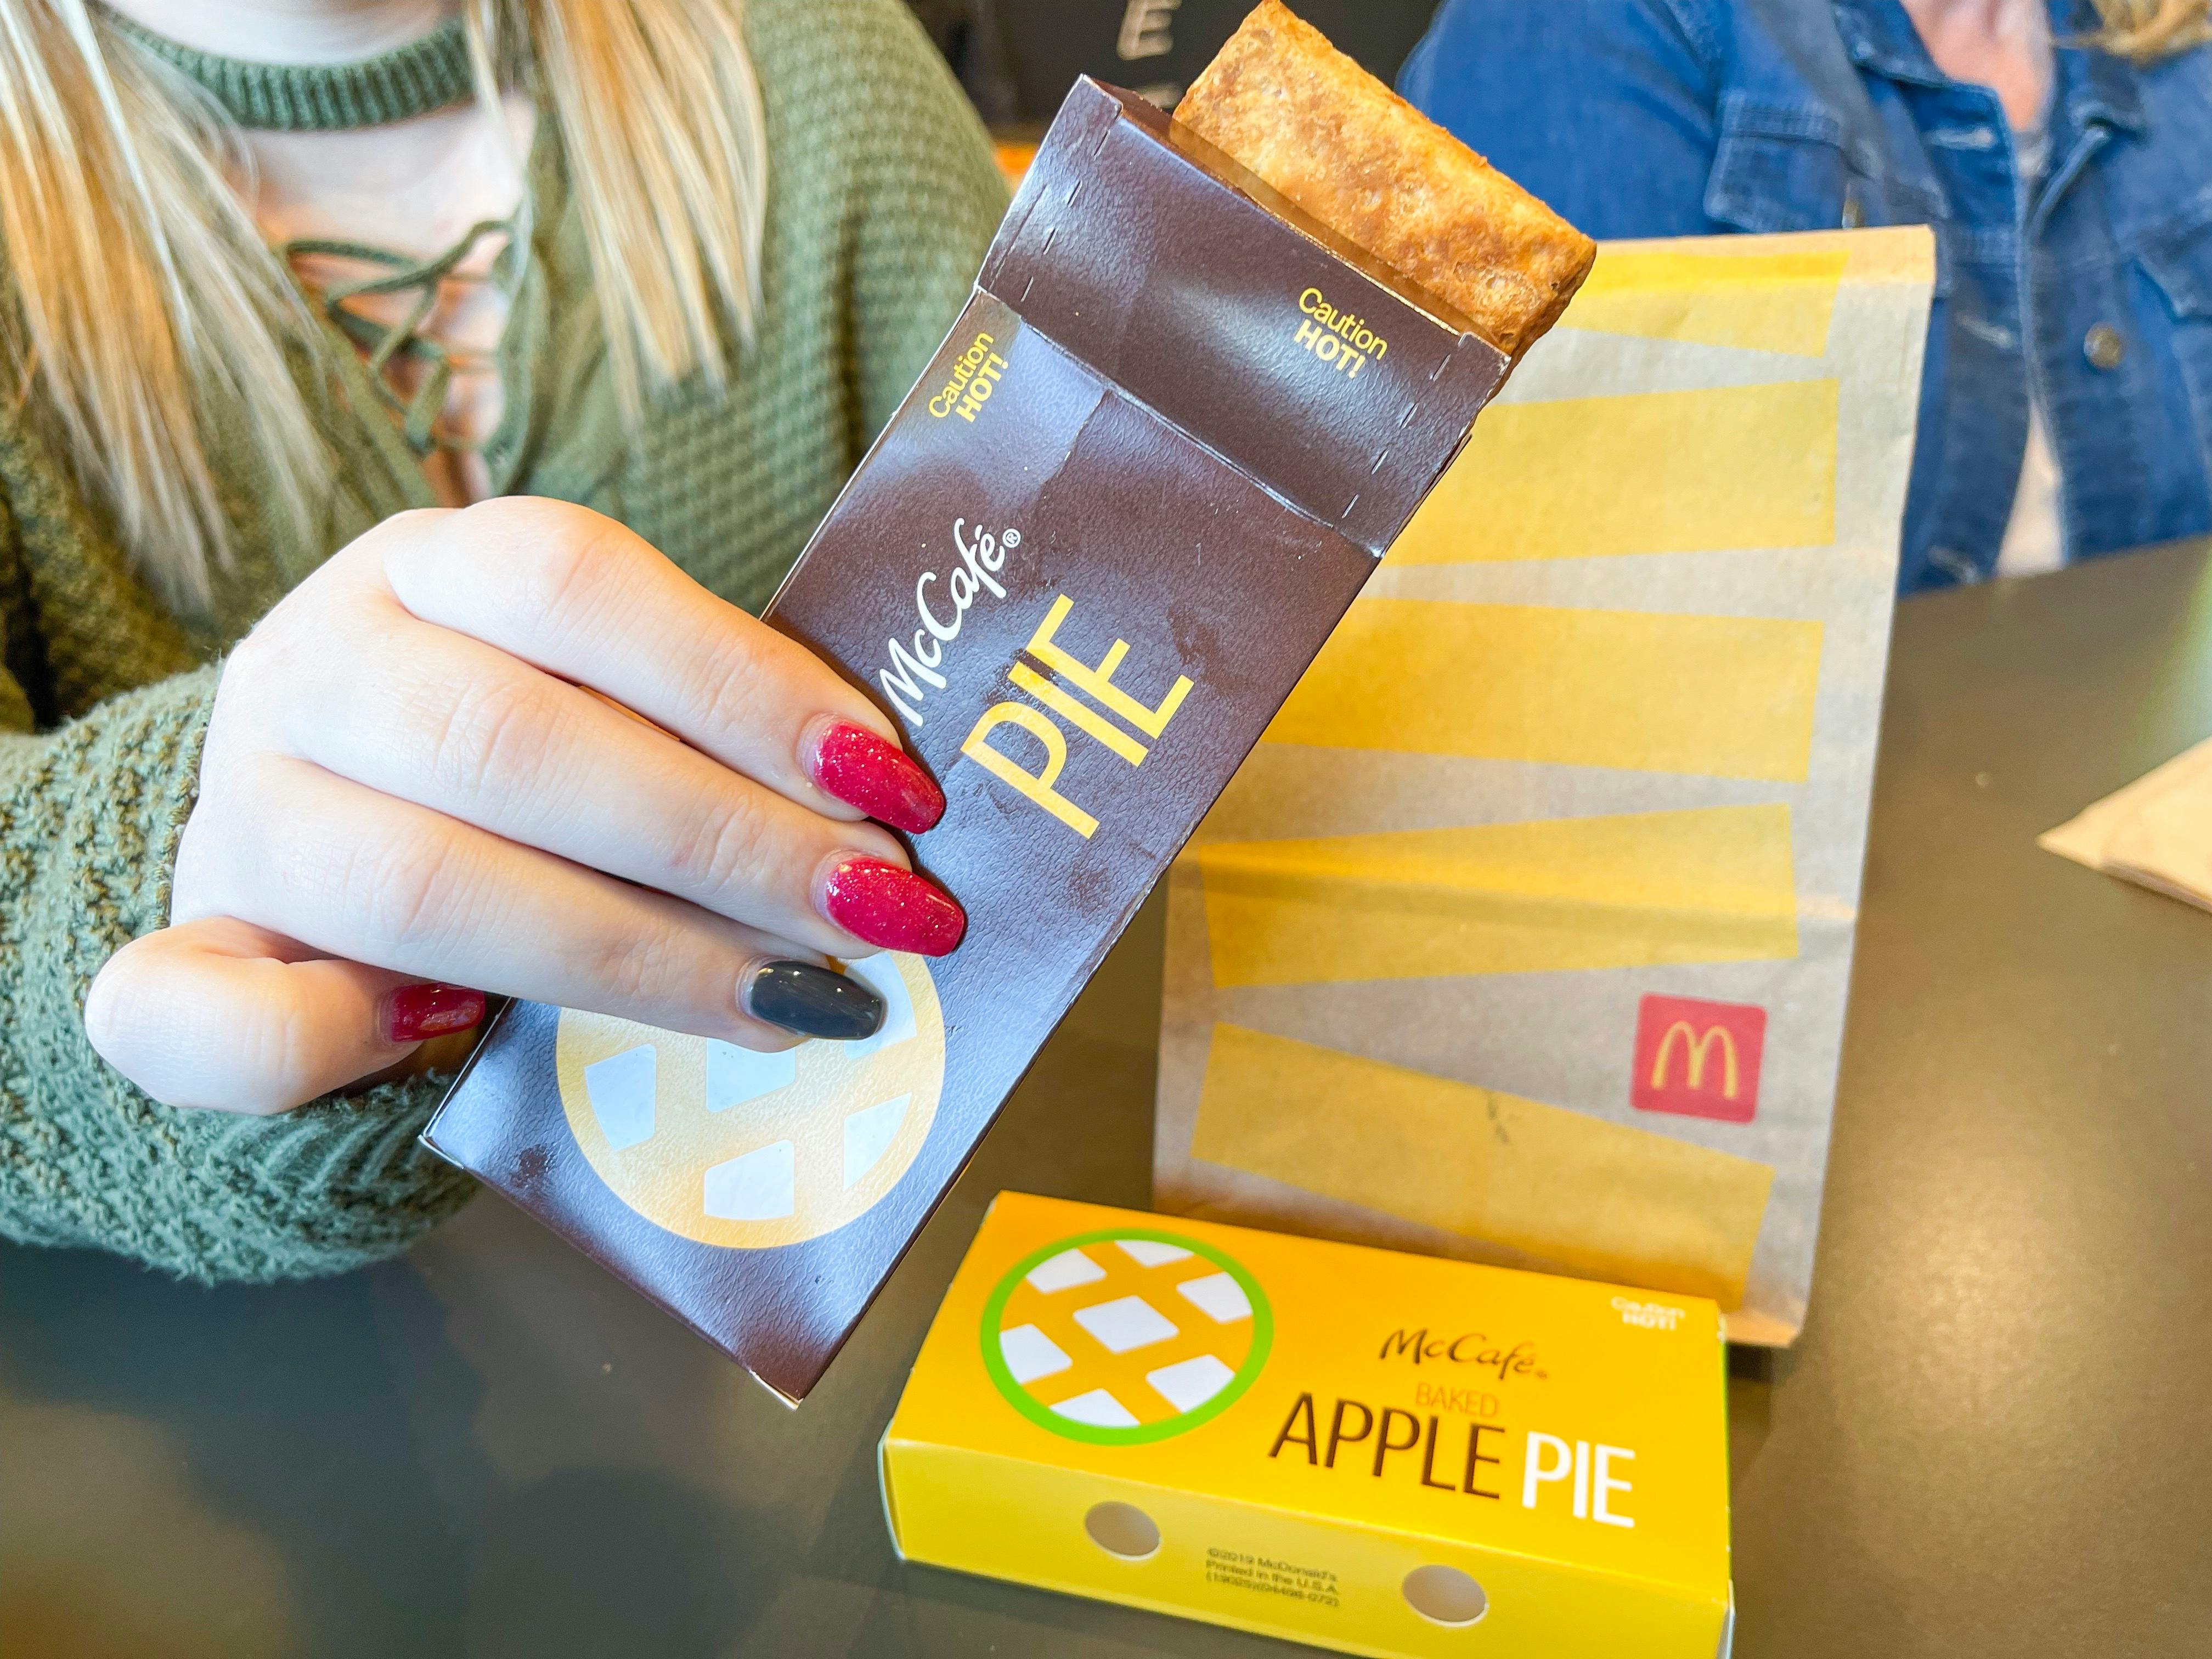 A person holding a McCafe pie in a box in front of a McCafe Apple Pie and McDonald's bag sitting on the table.